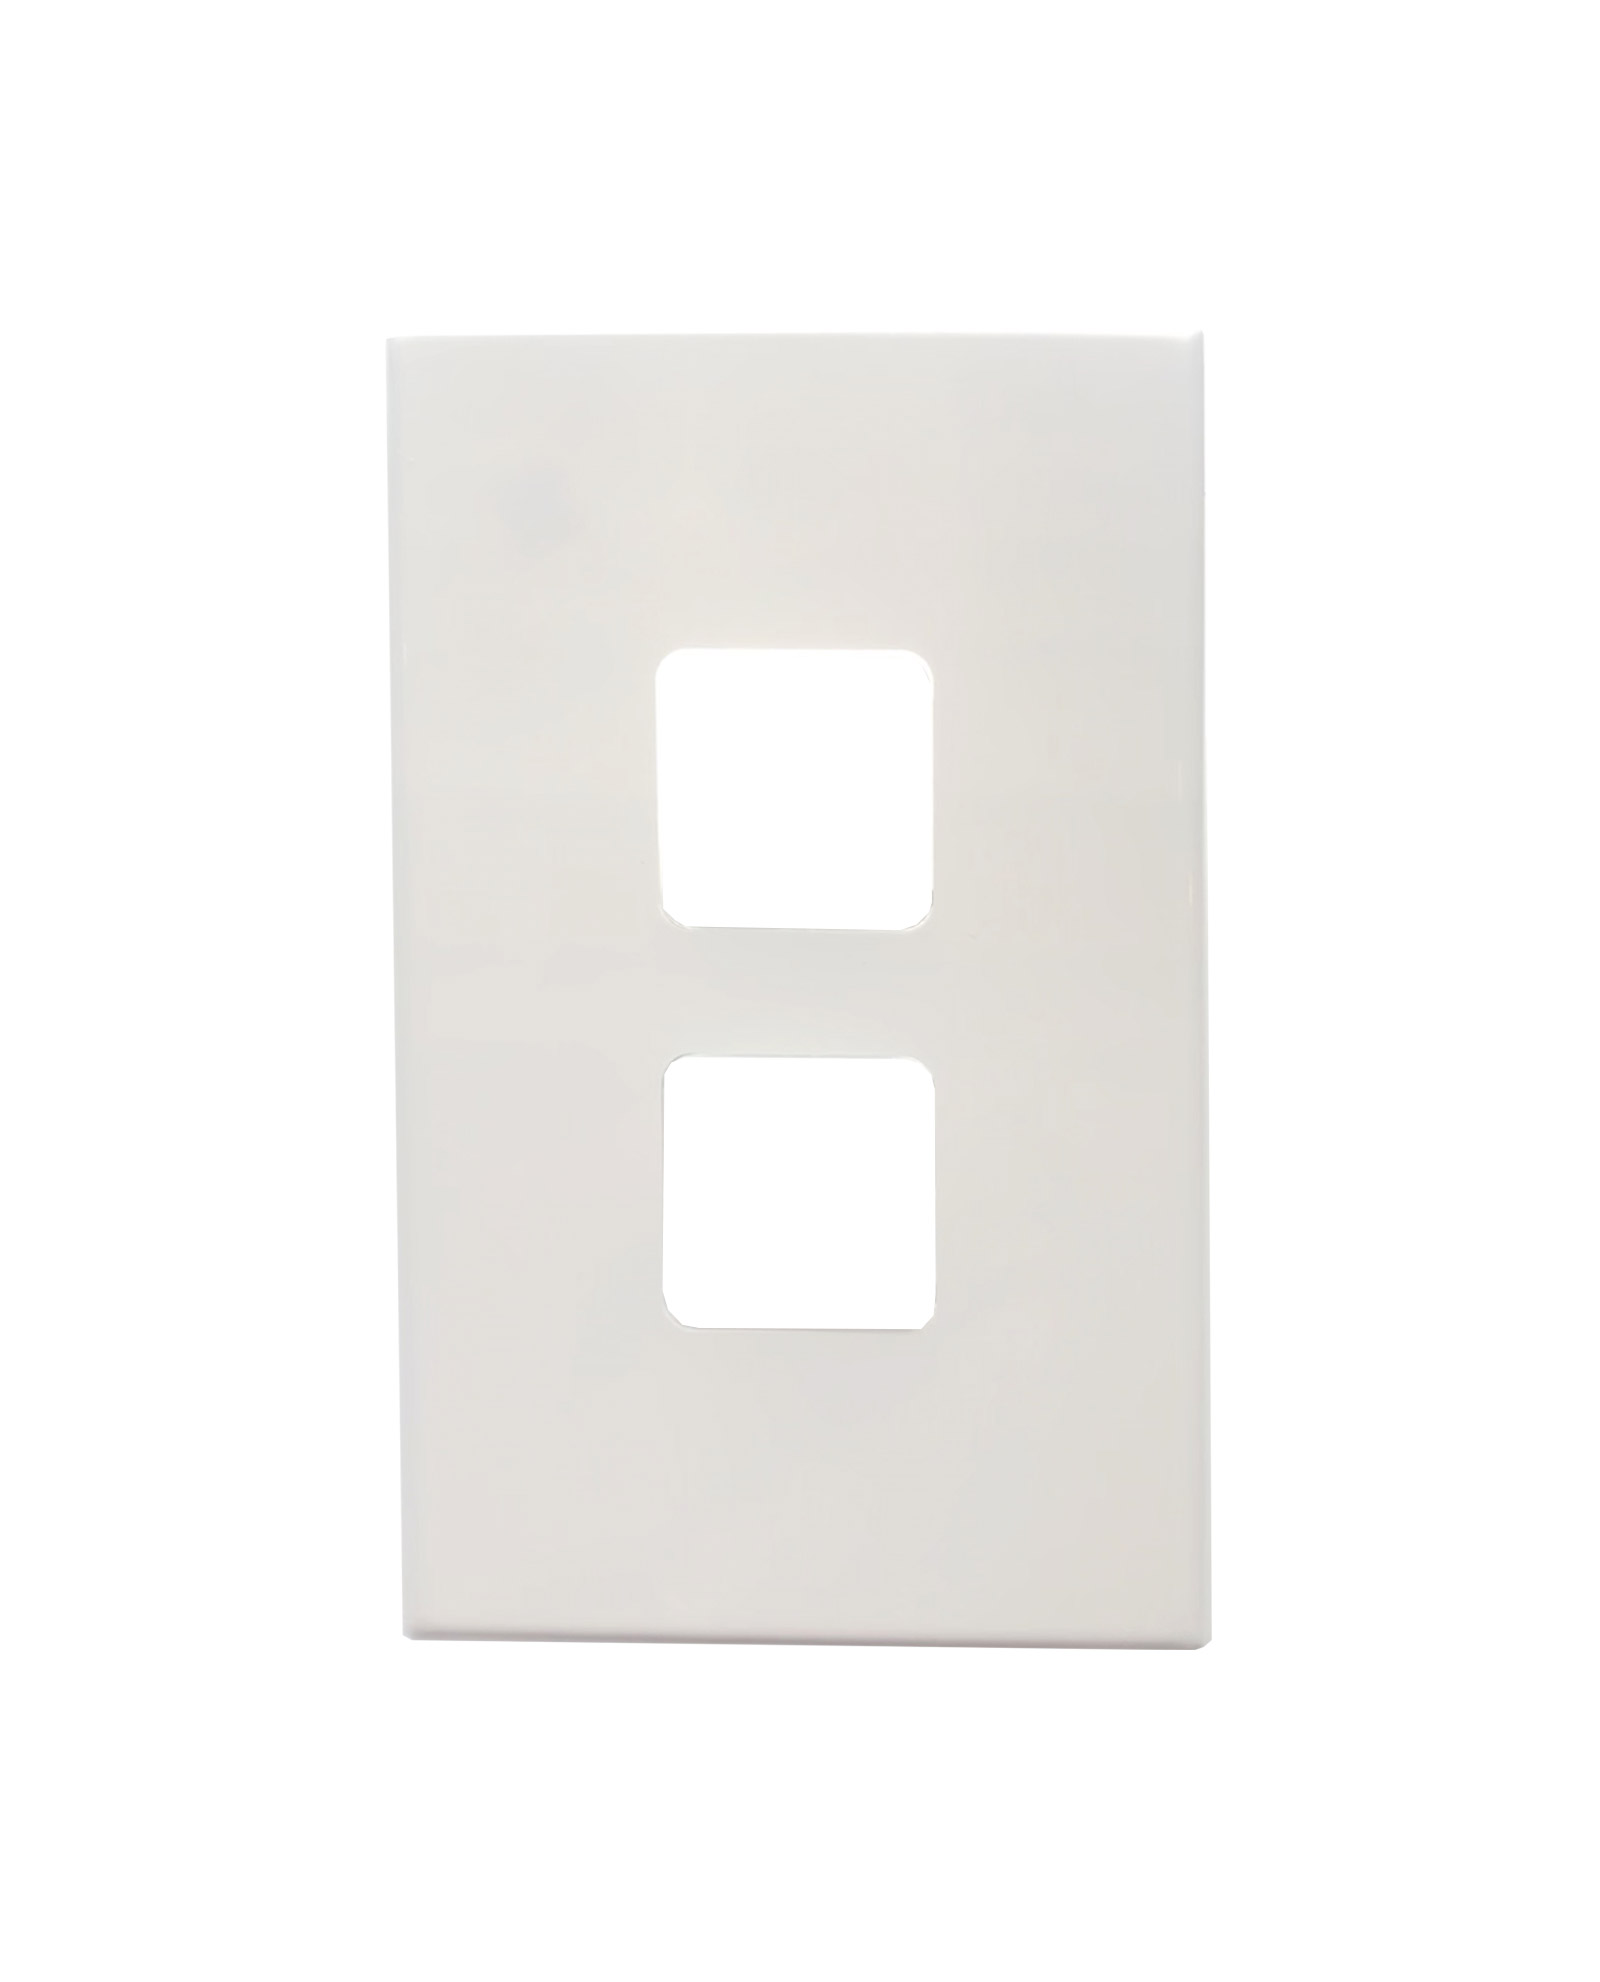 Pdl 600 Series 682vh Double Vertical Cover Plate